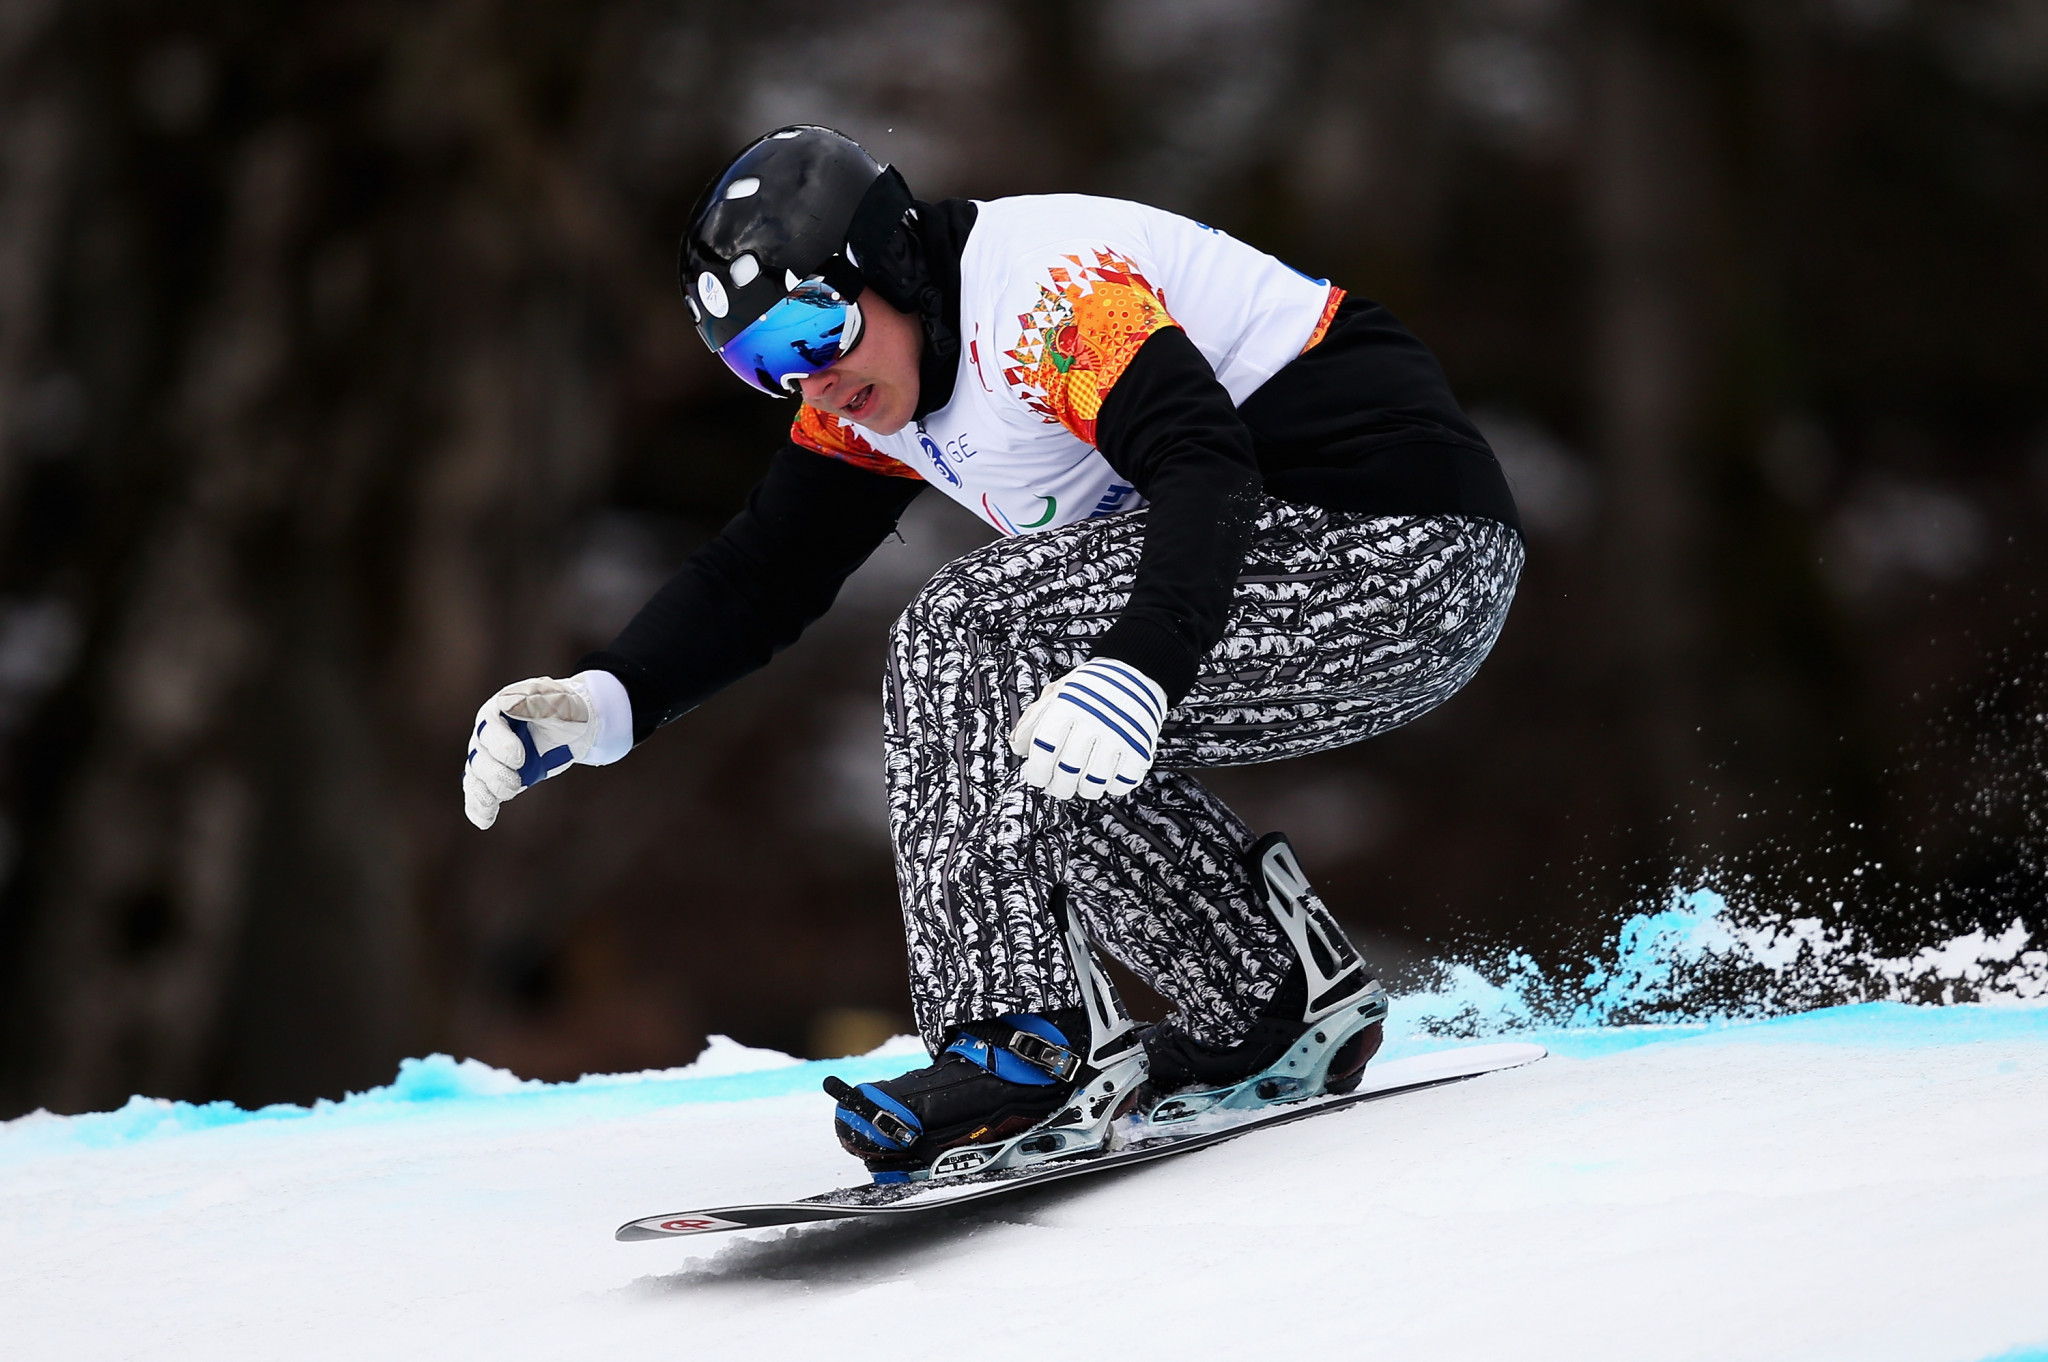 Home favourite among winners at World Para Snowboard World Cup in Pyha